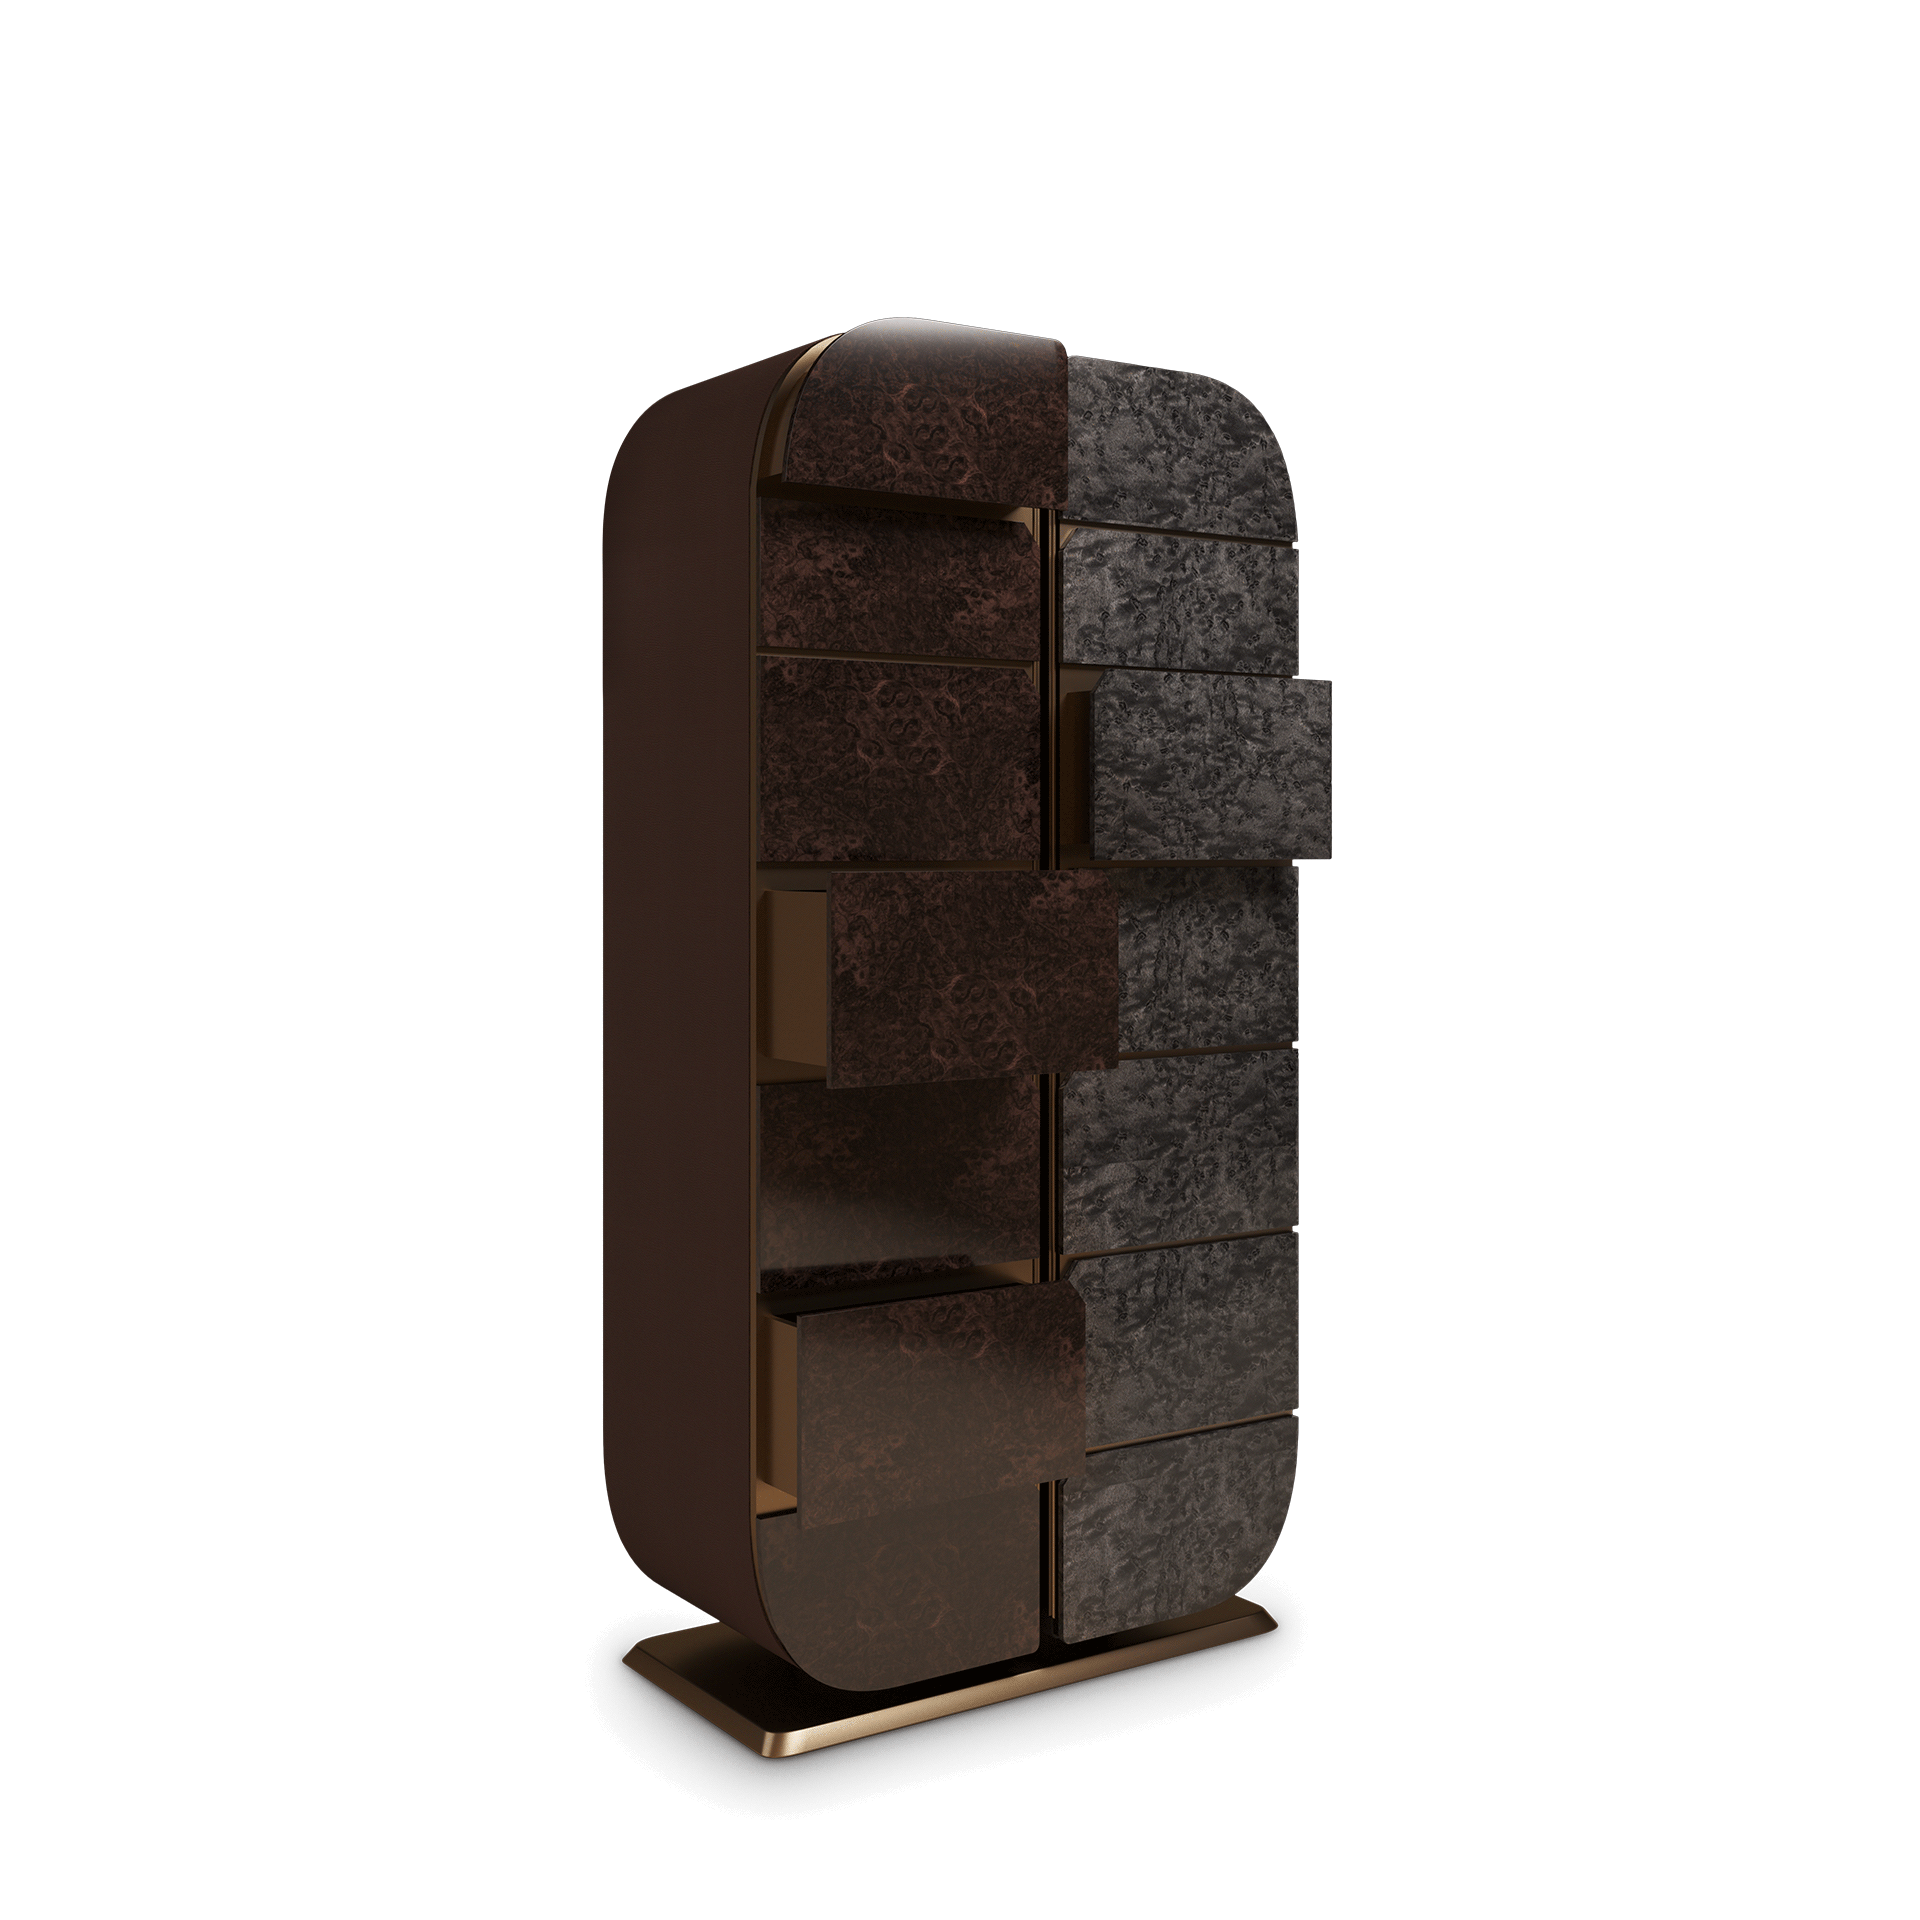 Wtc chest of drawers